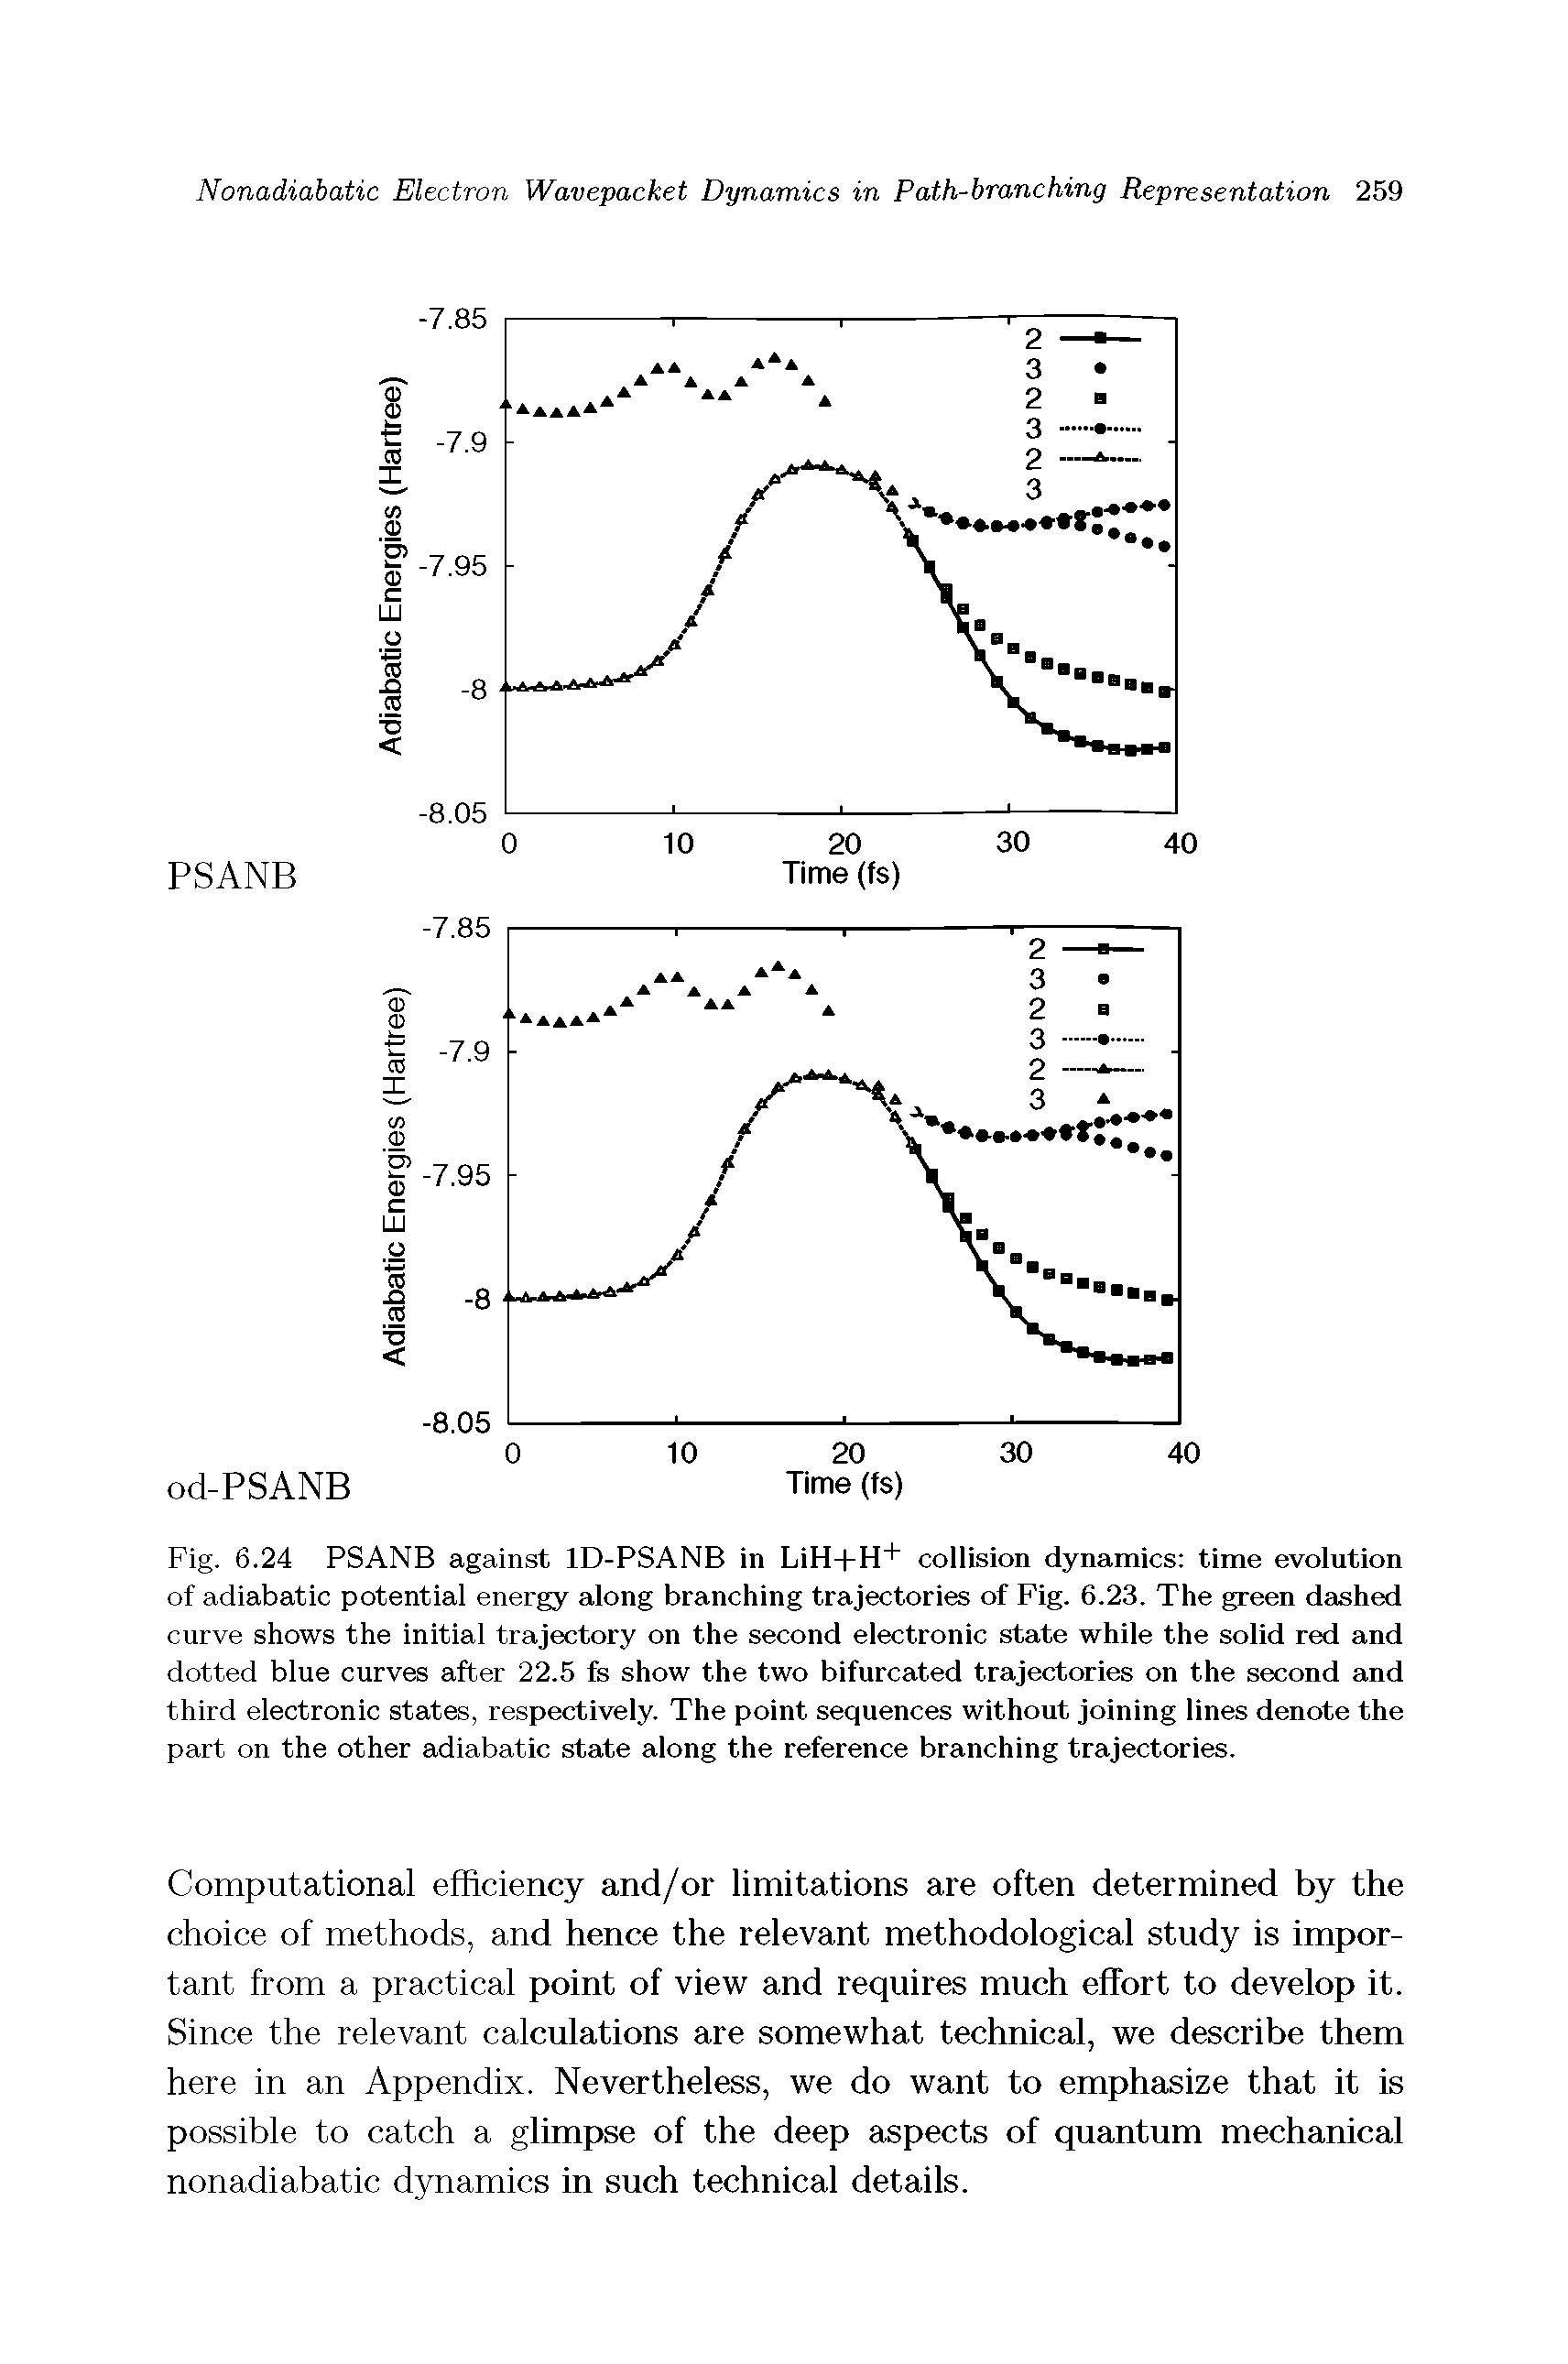 Fig. 6.24 PSANB against ID-PSANB in LiH+H+ collision dynamics time evolution of adiabatic potential energy along branching trajectories of Fig. 6.23. The green dashed curve shows the initial trajectory on the second electronic state while the solid red and dotted blue curves after 22.5 fe show the two bifurcated trajectories on the second and third electronic states, respectively. The point sequences without joining lines denote the part on the other adiabatic state along the reference branching trajectories.